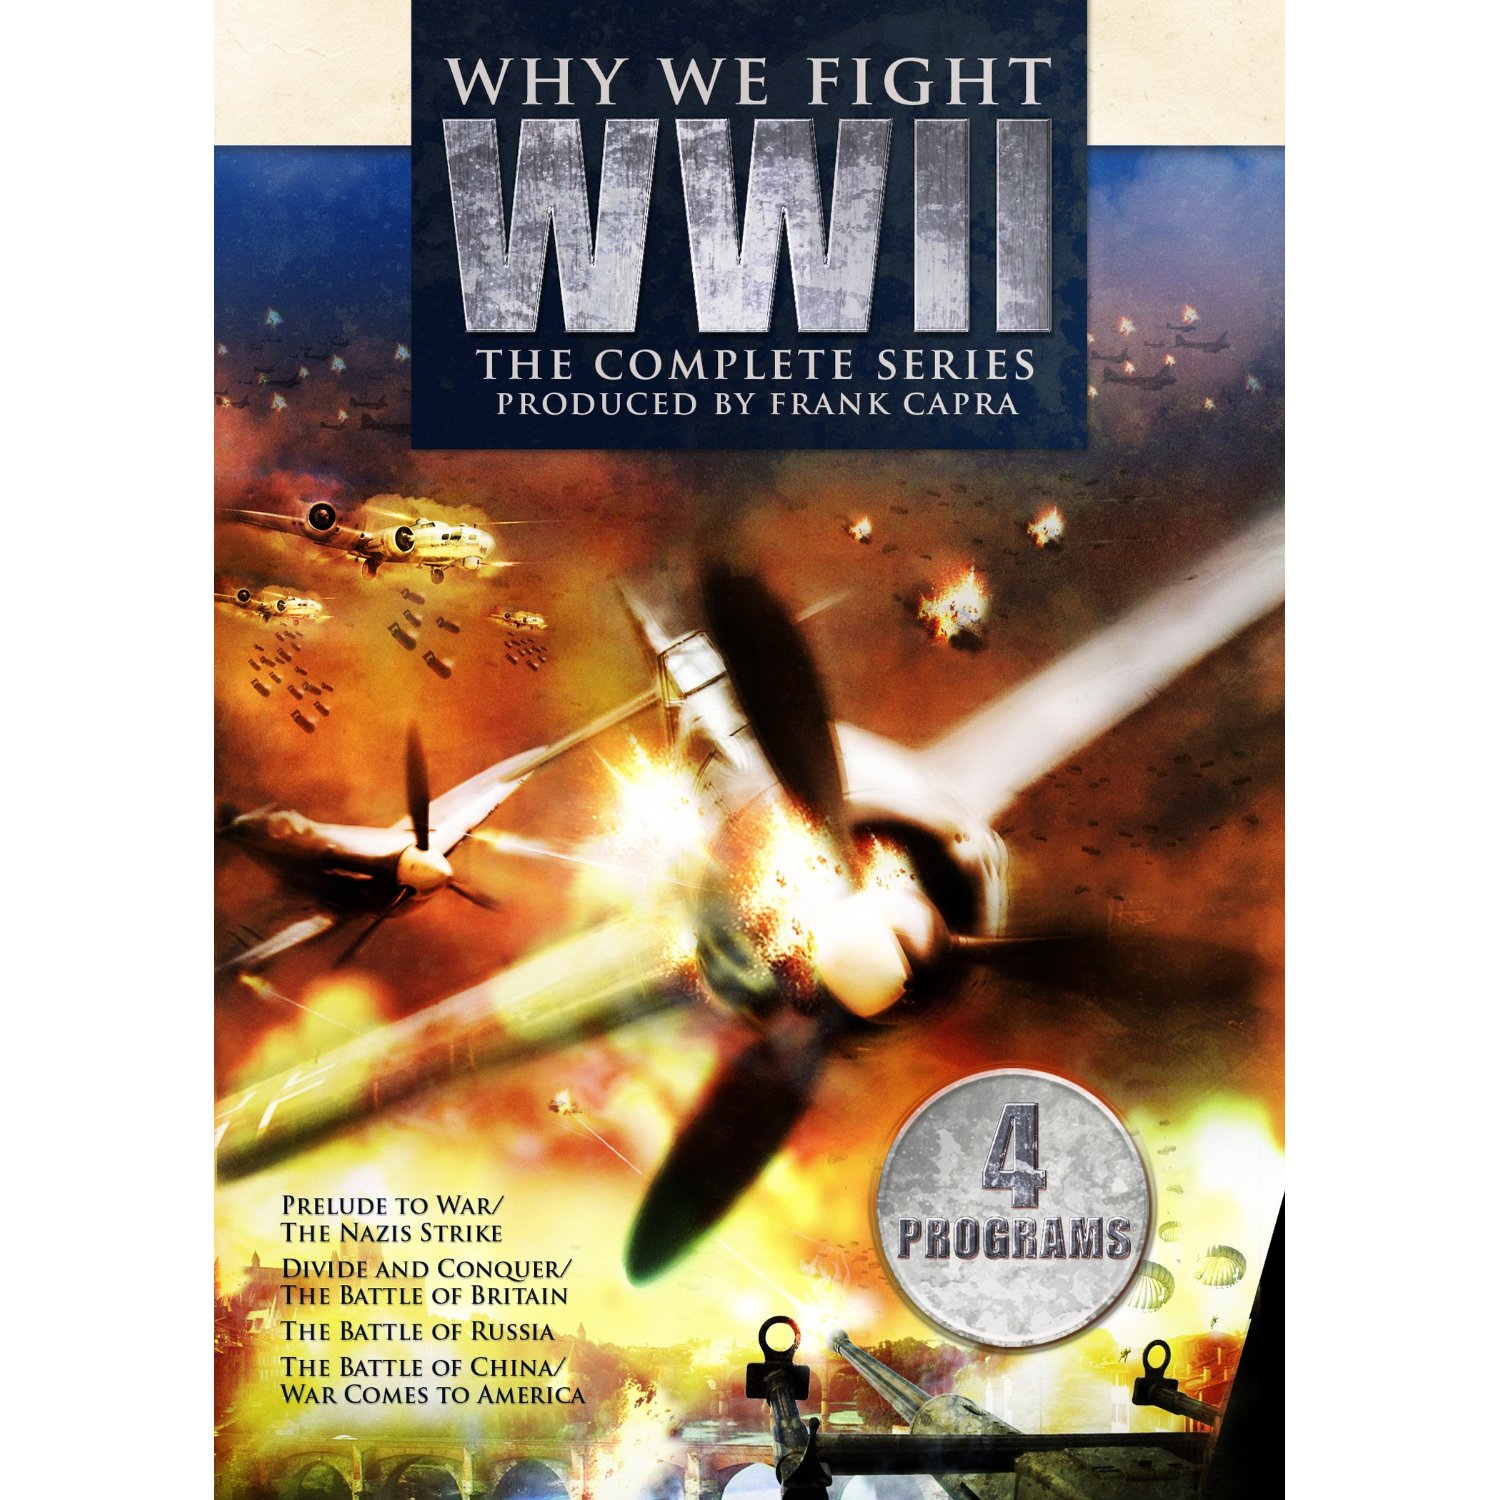 Why We Fight, WWII documentary